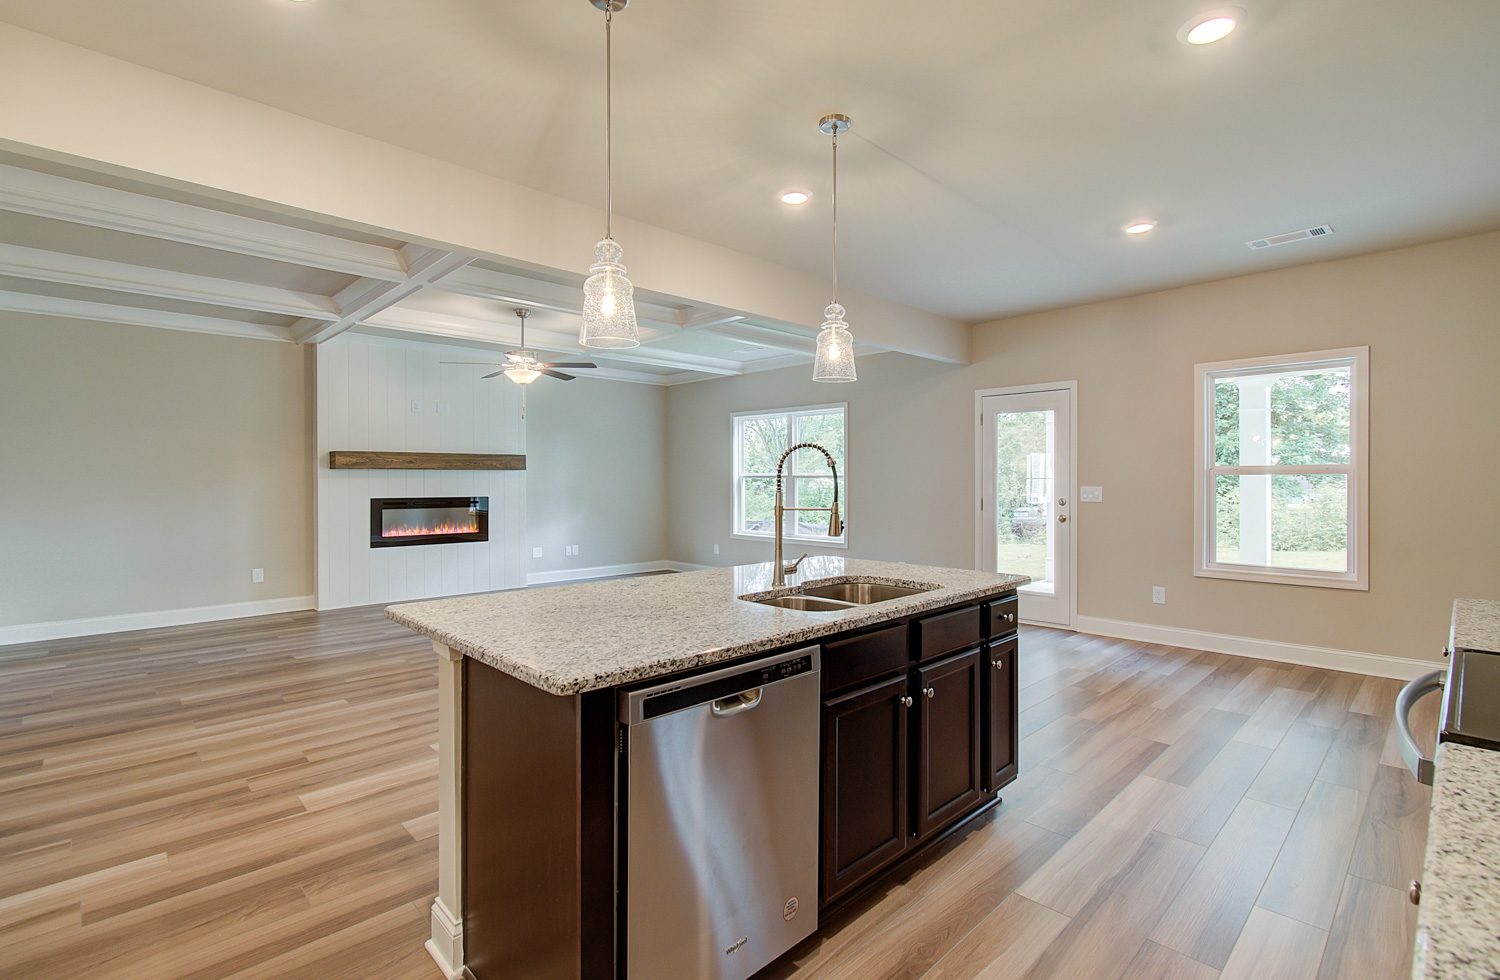 Chafin Communities - Kitchen to Great Room